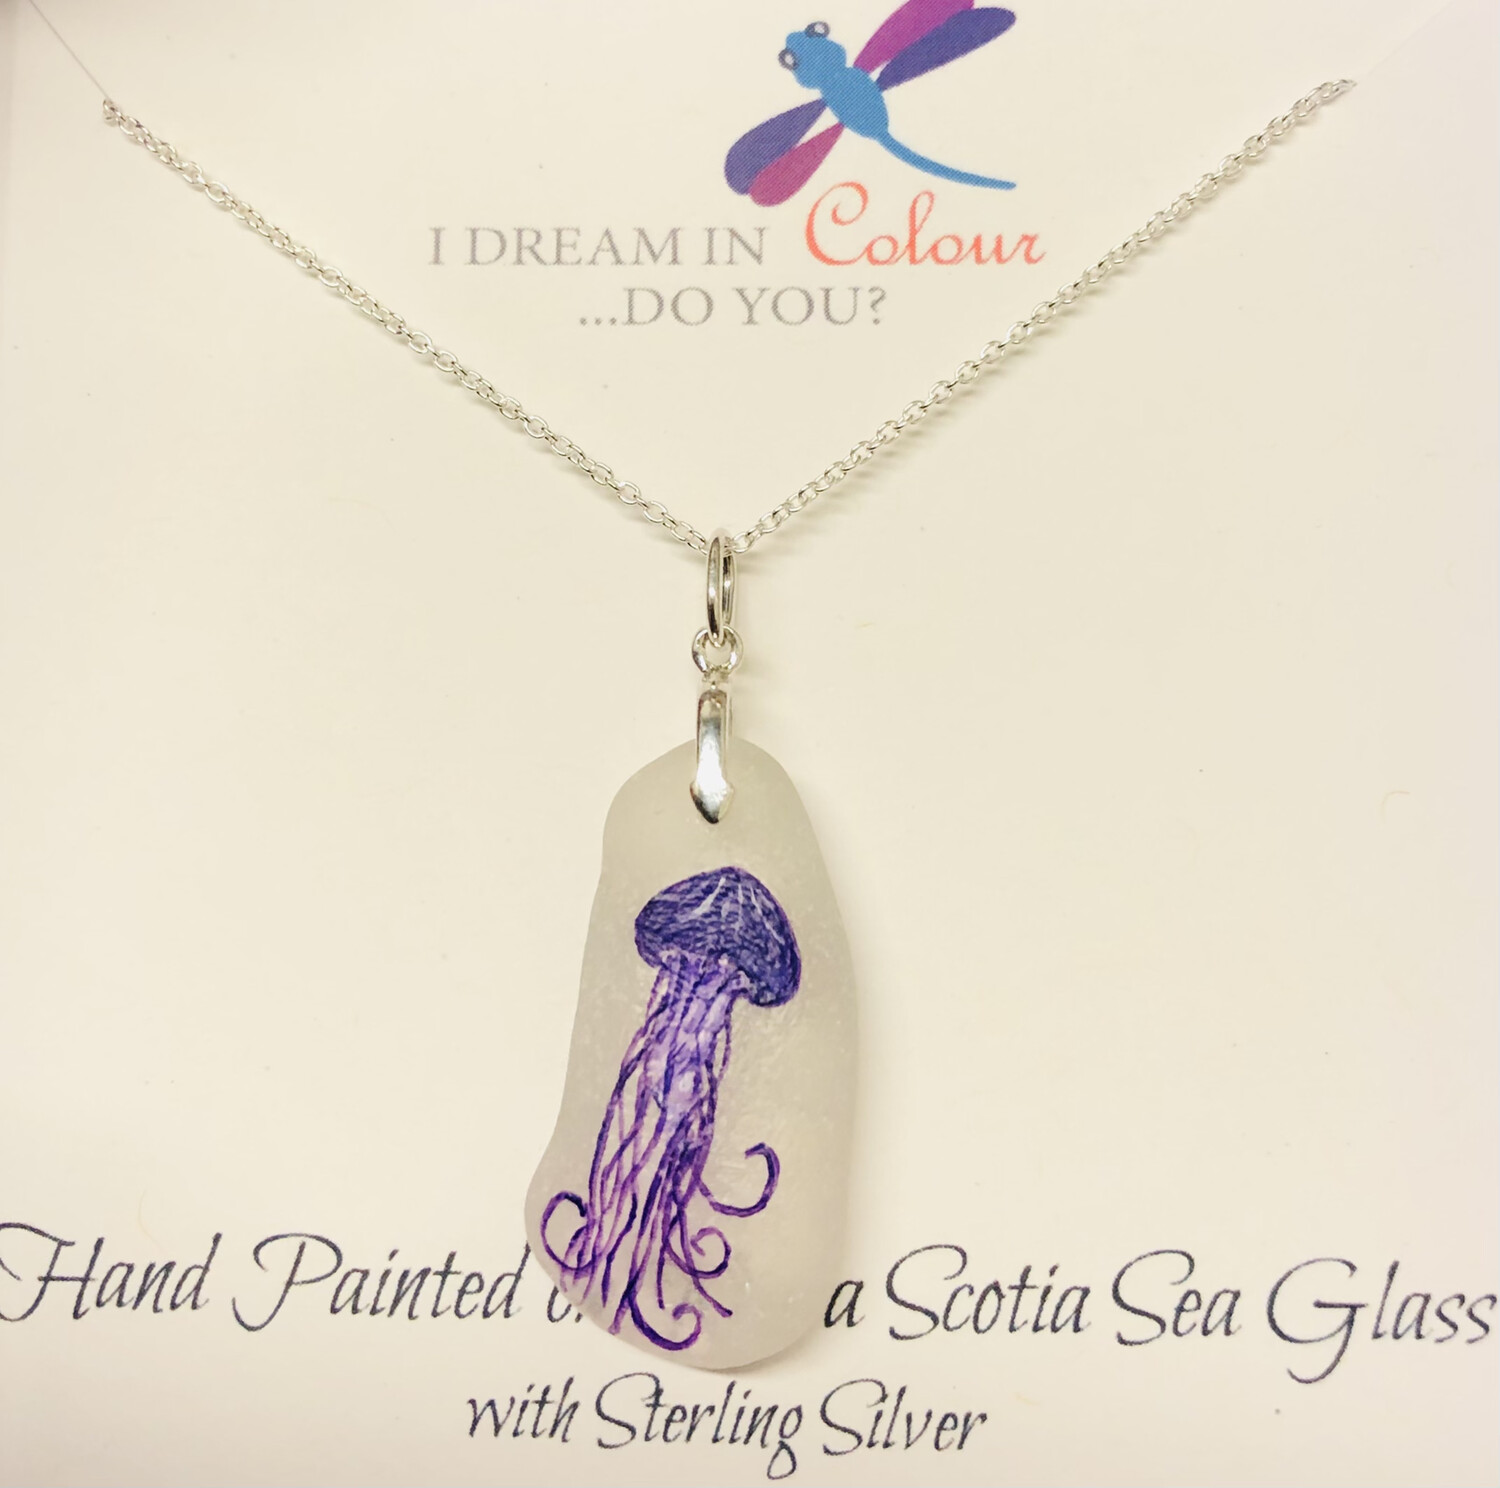 Painted Sea Glass, Jellyfish - I Dream in Colour